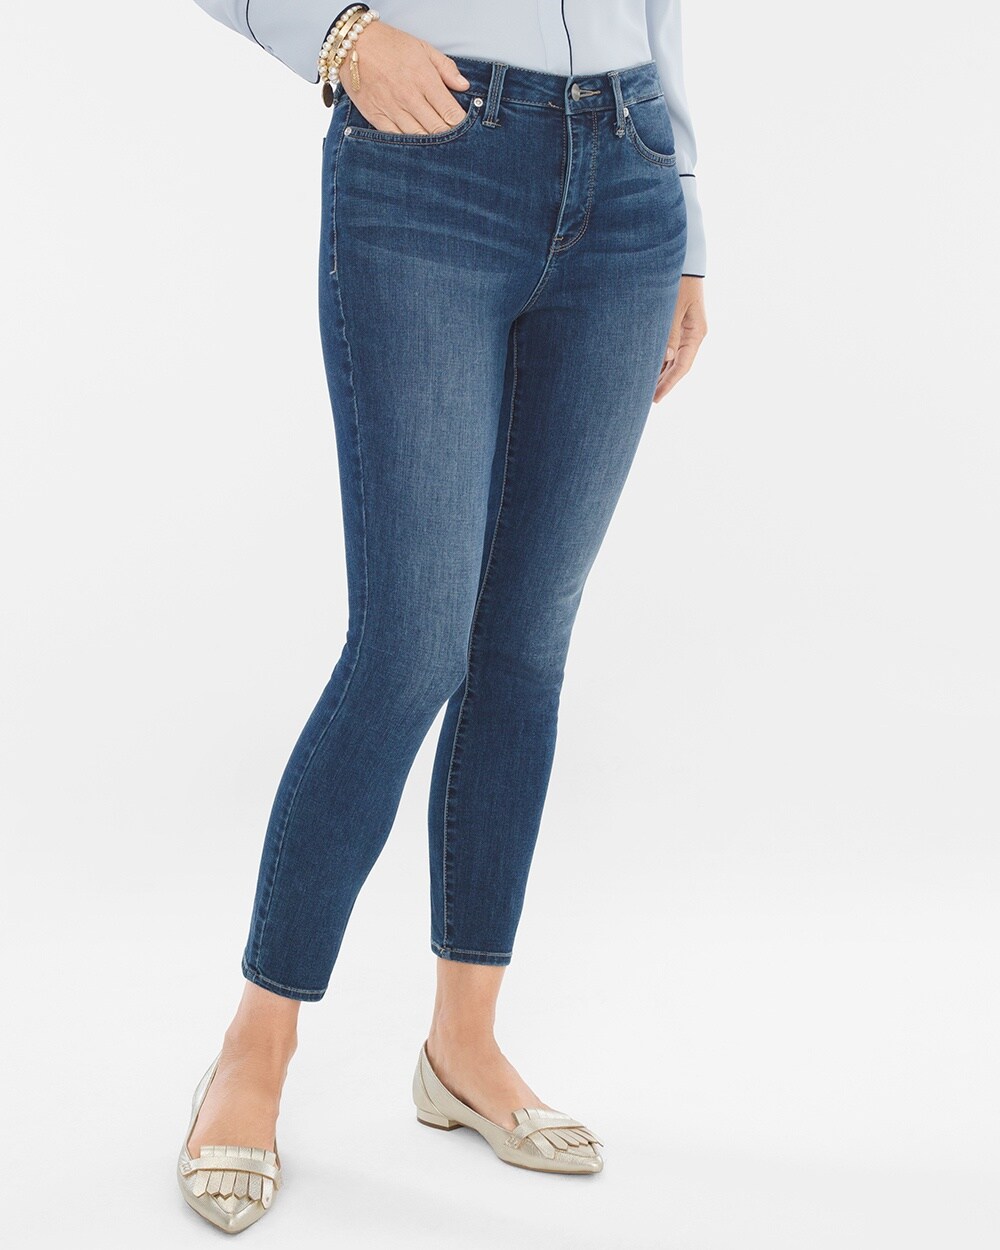 NYDJ Cool Control Skinny Ankle Jeans